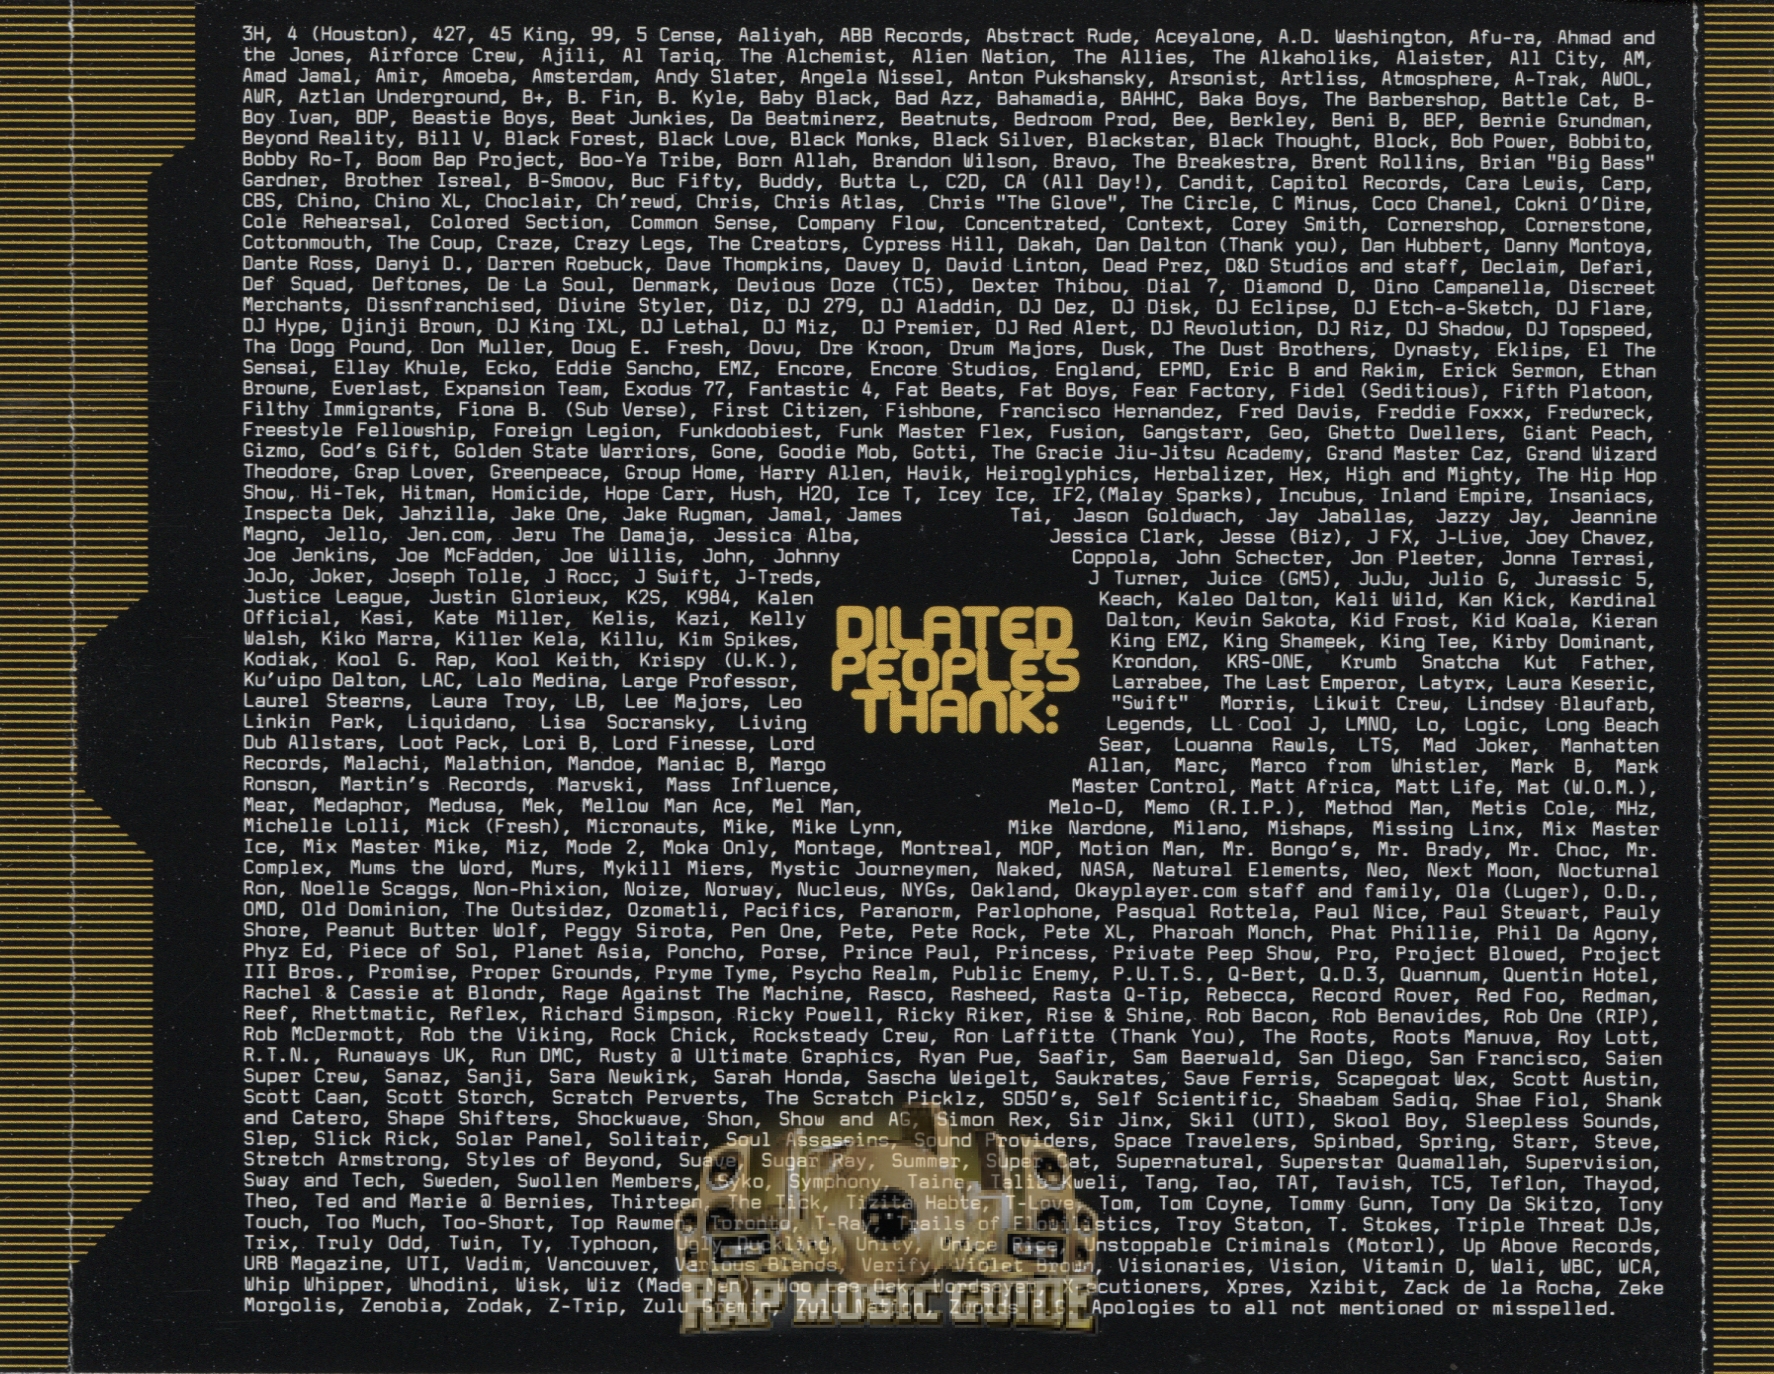 Dilated Peoples - Expansion Team: CD | Rap Music Guide